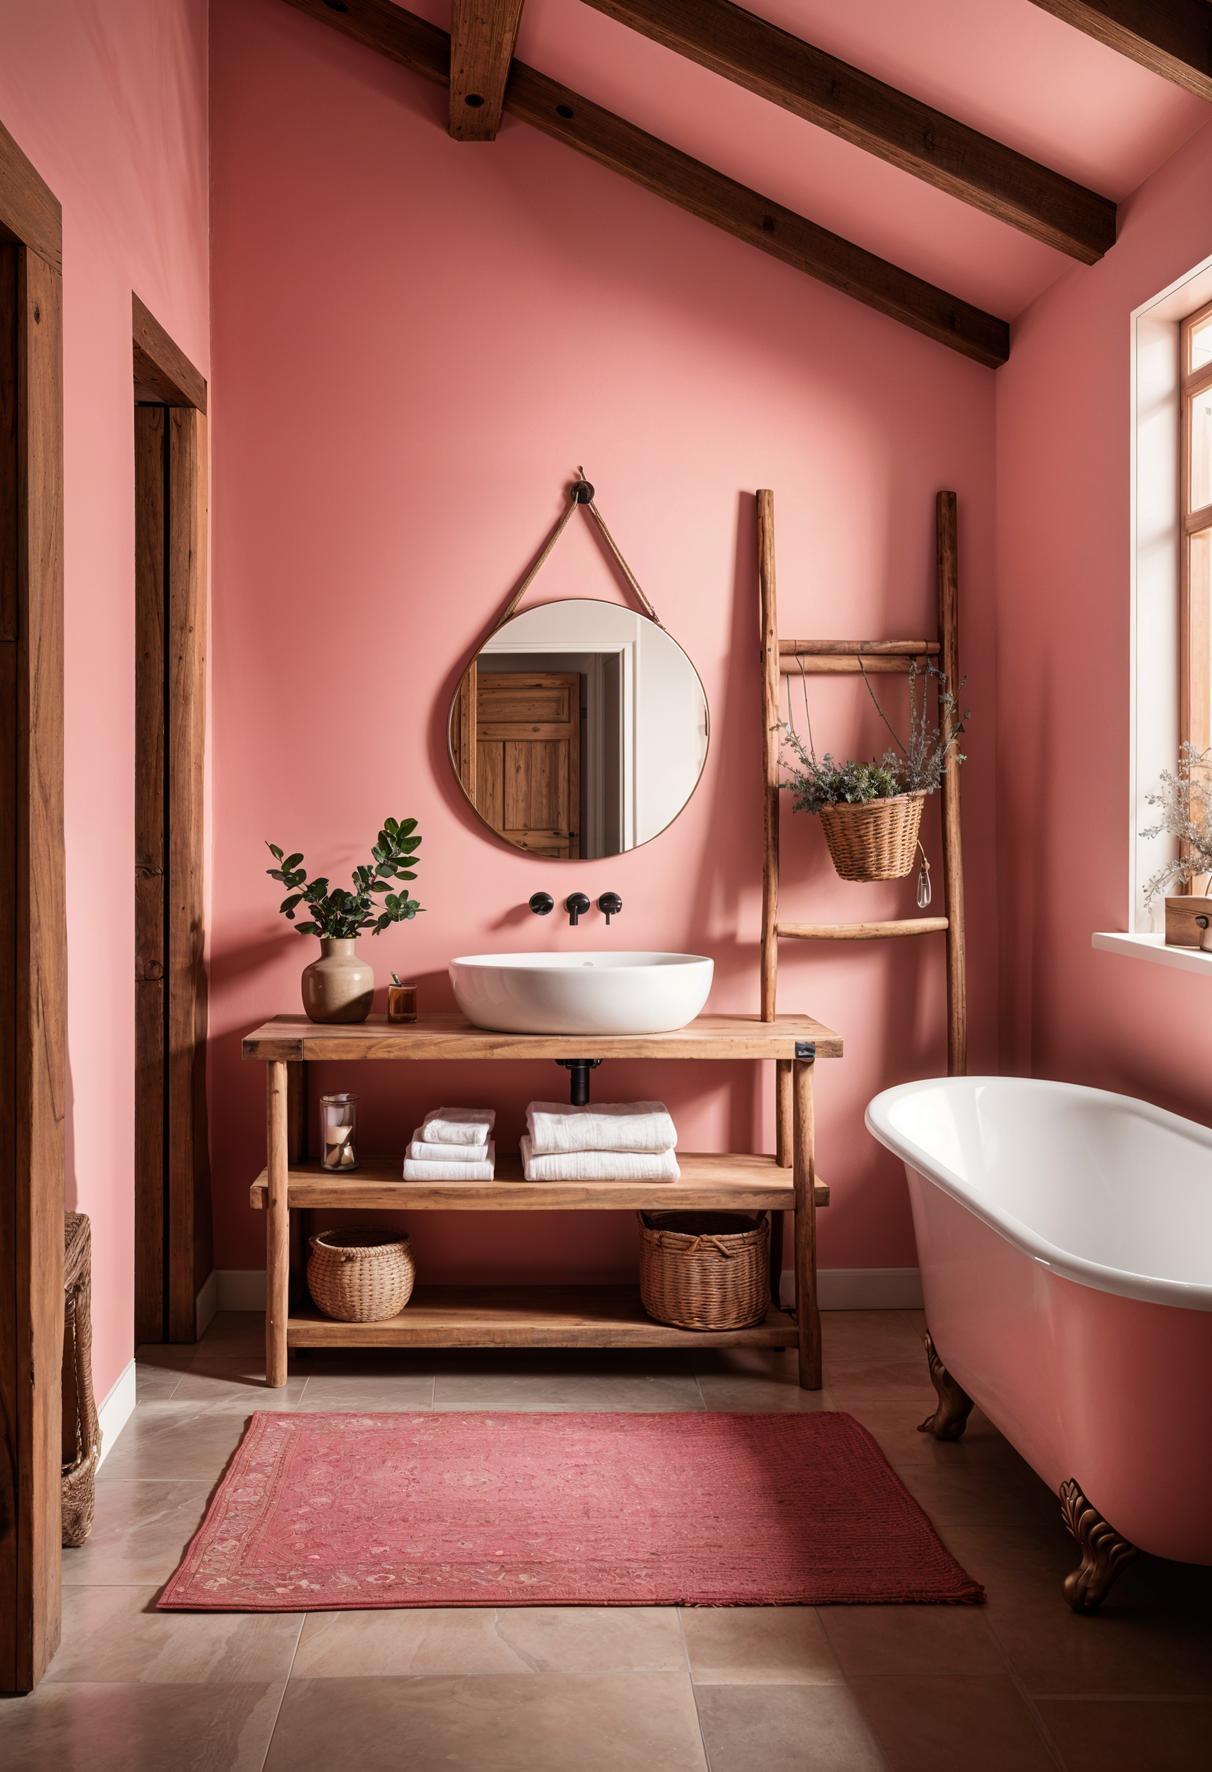 6. Wooden Accents in Pink Bathroom-2